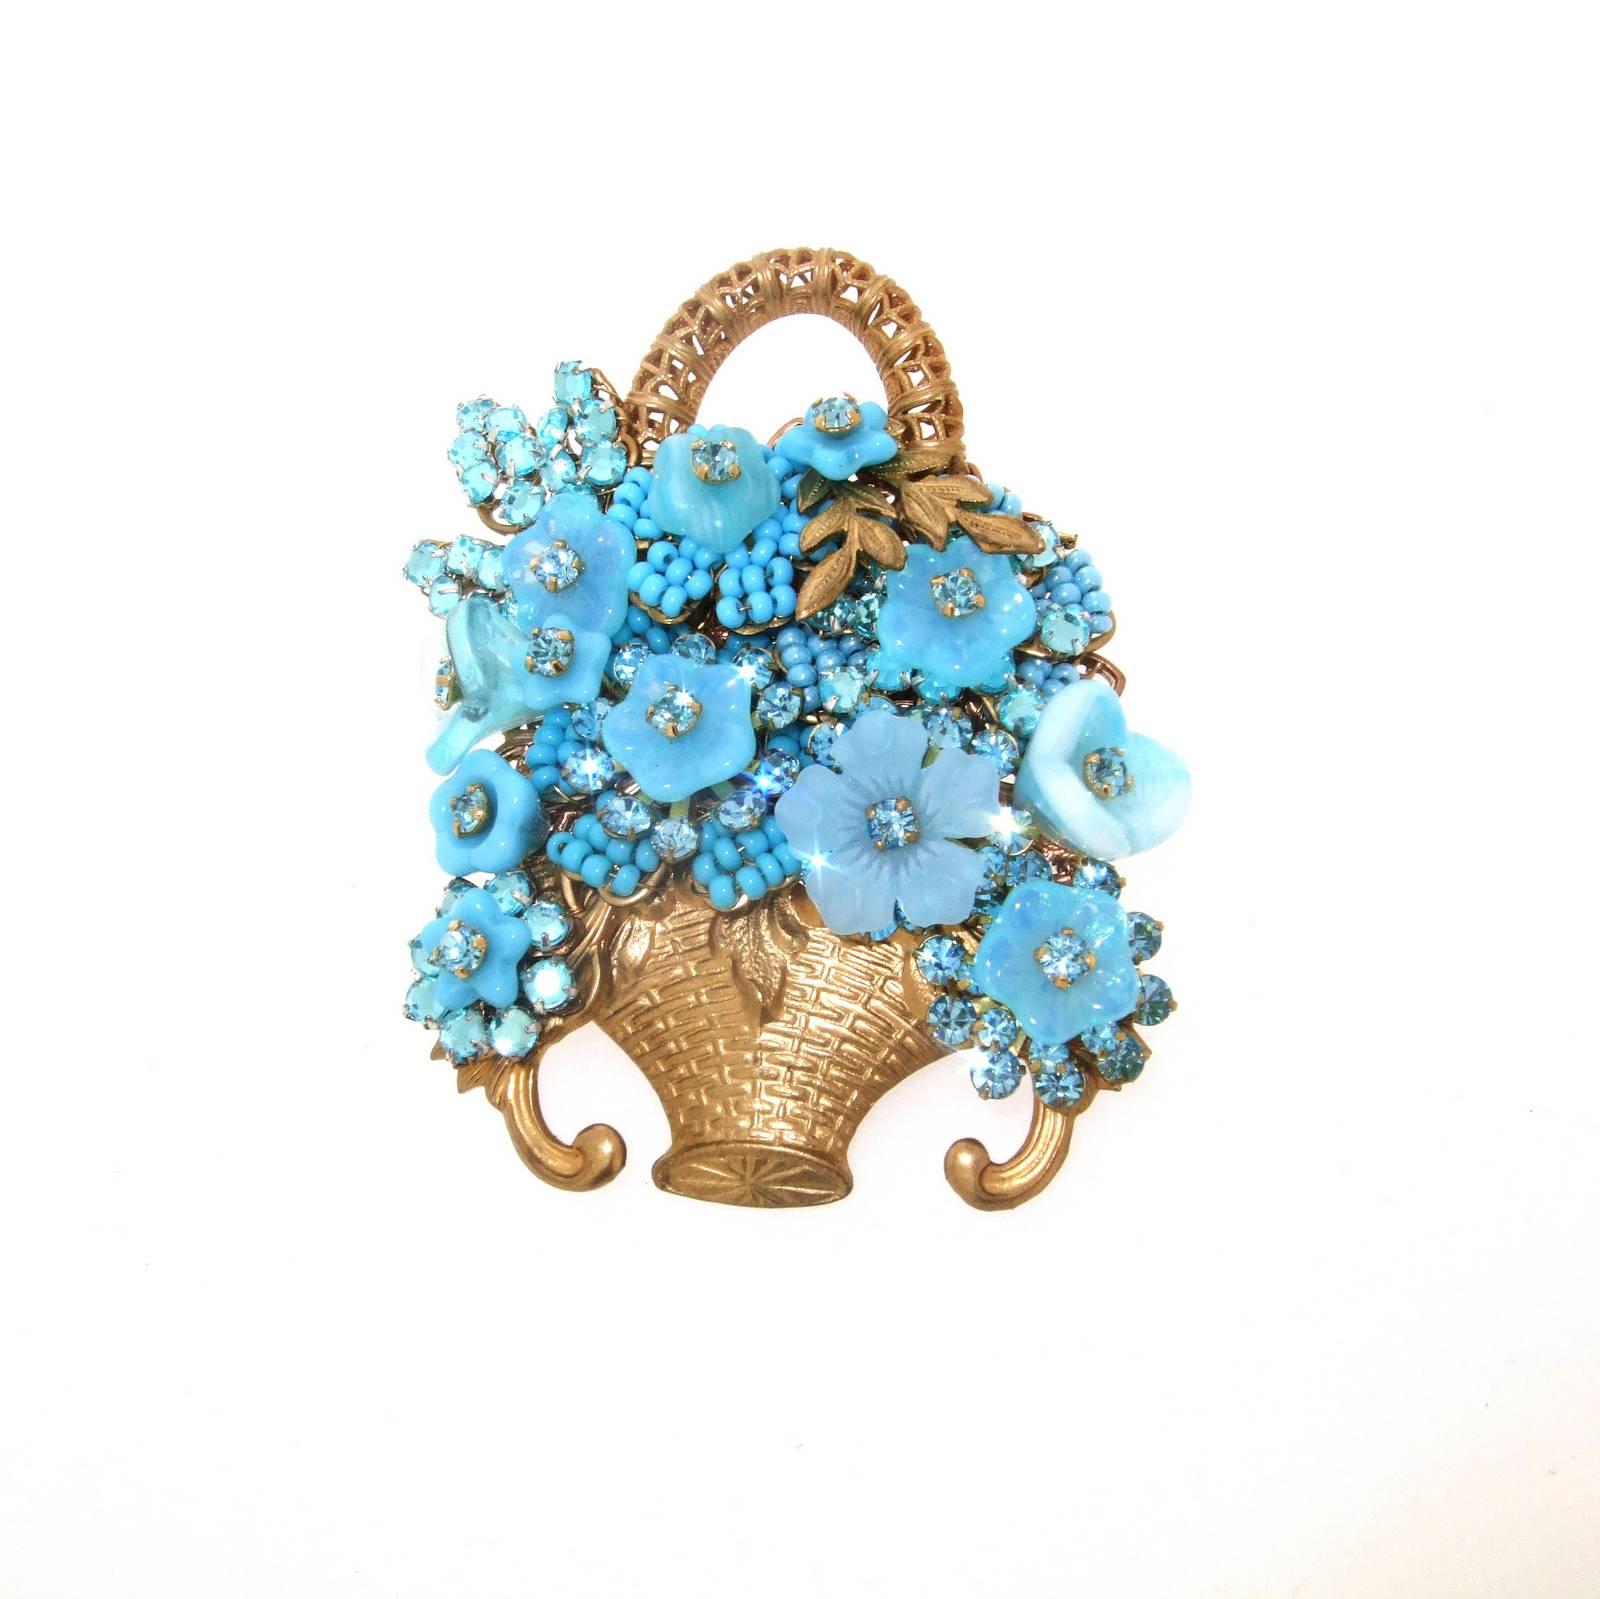 A beautiful vintage brooch by Stanley Hagler of a turquoise blue basket of flowers with vintage glass and crystals.

It measures 5cm wide by 6.4cm high.